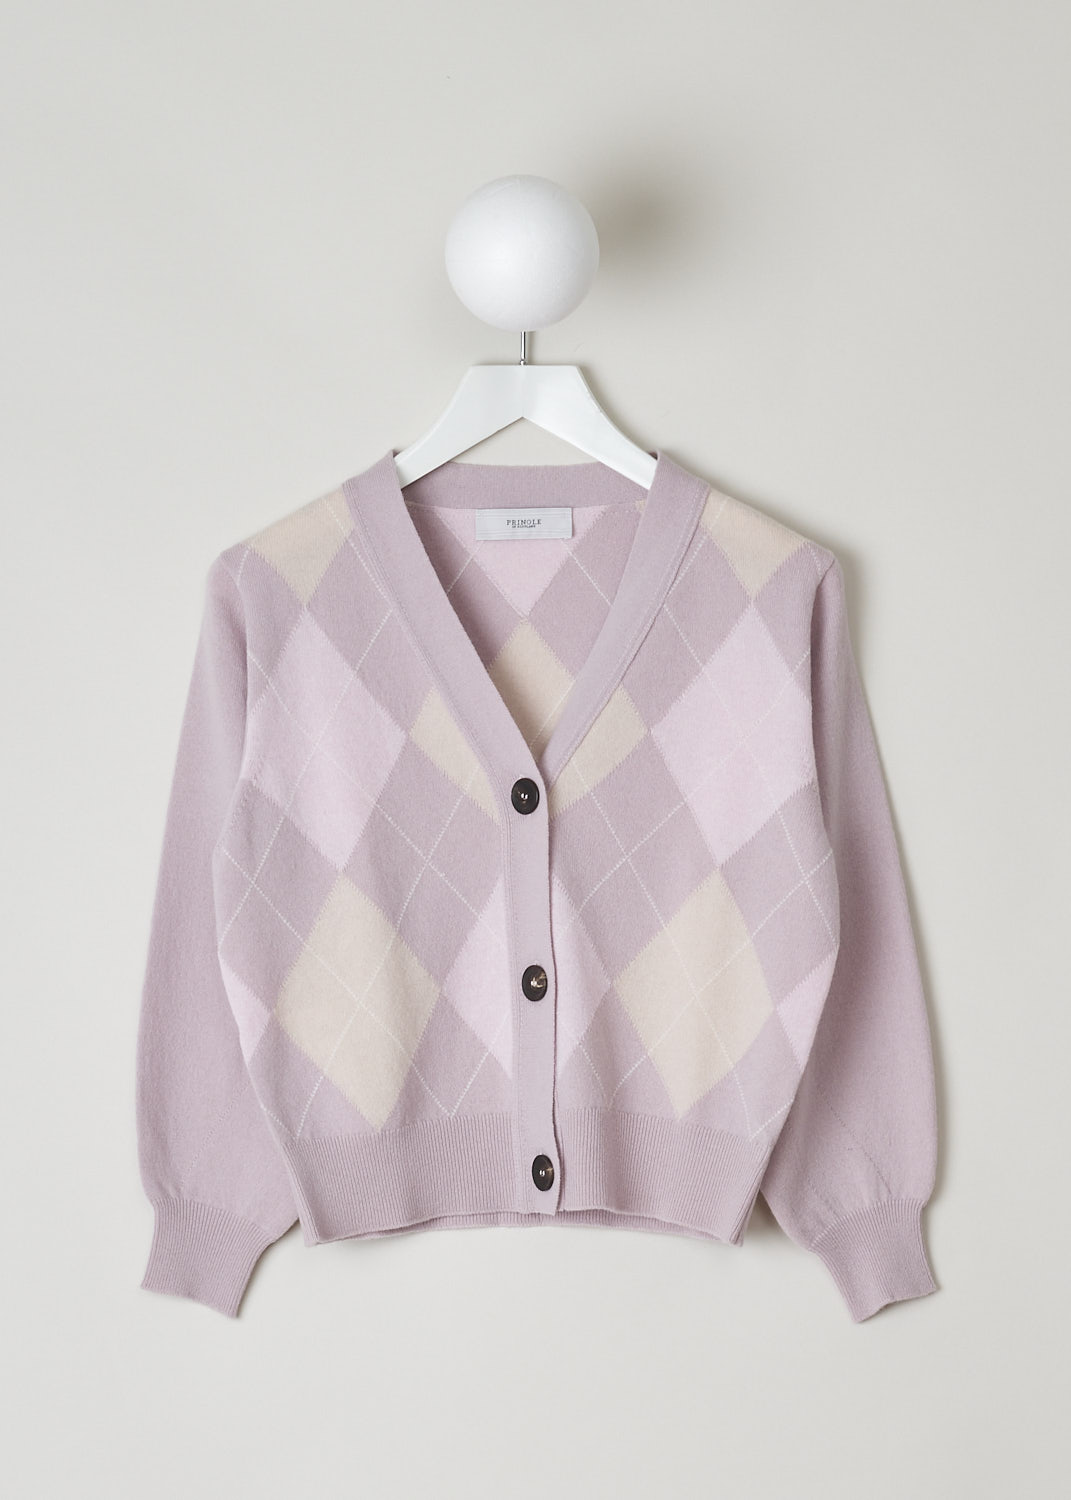 PRINGLE OF SCOTLAND, POWDER PINK ARGYLE CARDIGAN, PWB829_TZB2_POWDER_PIN, Pink, Print, Front, This powder pink argyle cardigan has a V-shaped neckline and a front button closure. The cuffs and hemline have a ribbed finish. The cardigan has a cropped length. 
